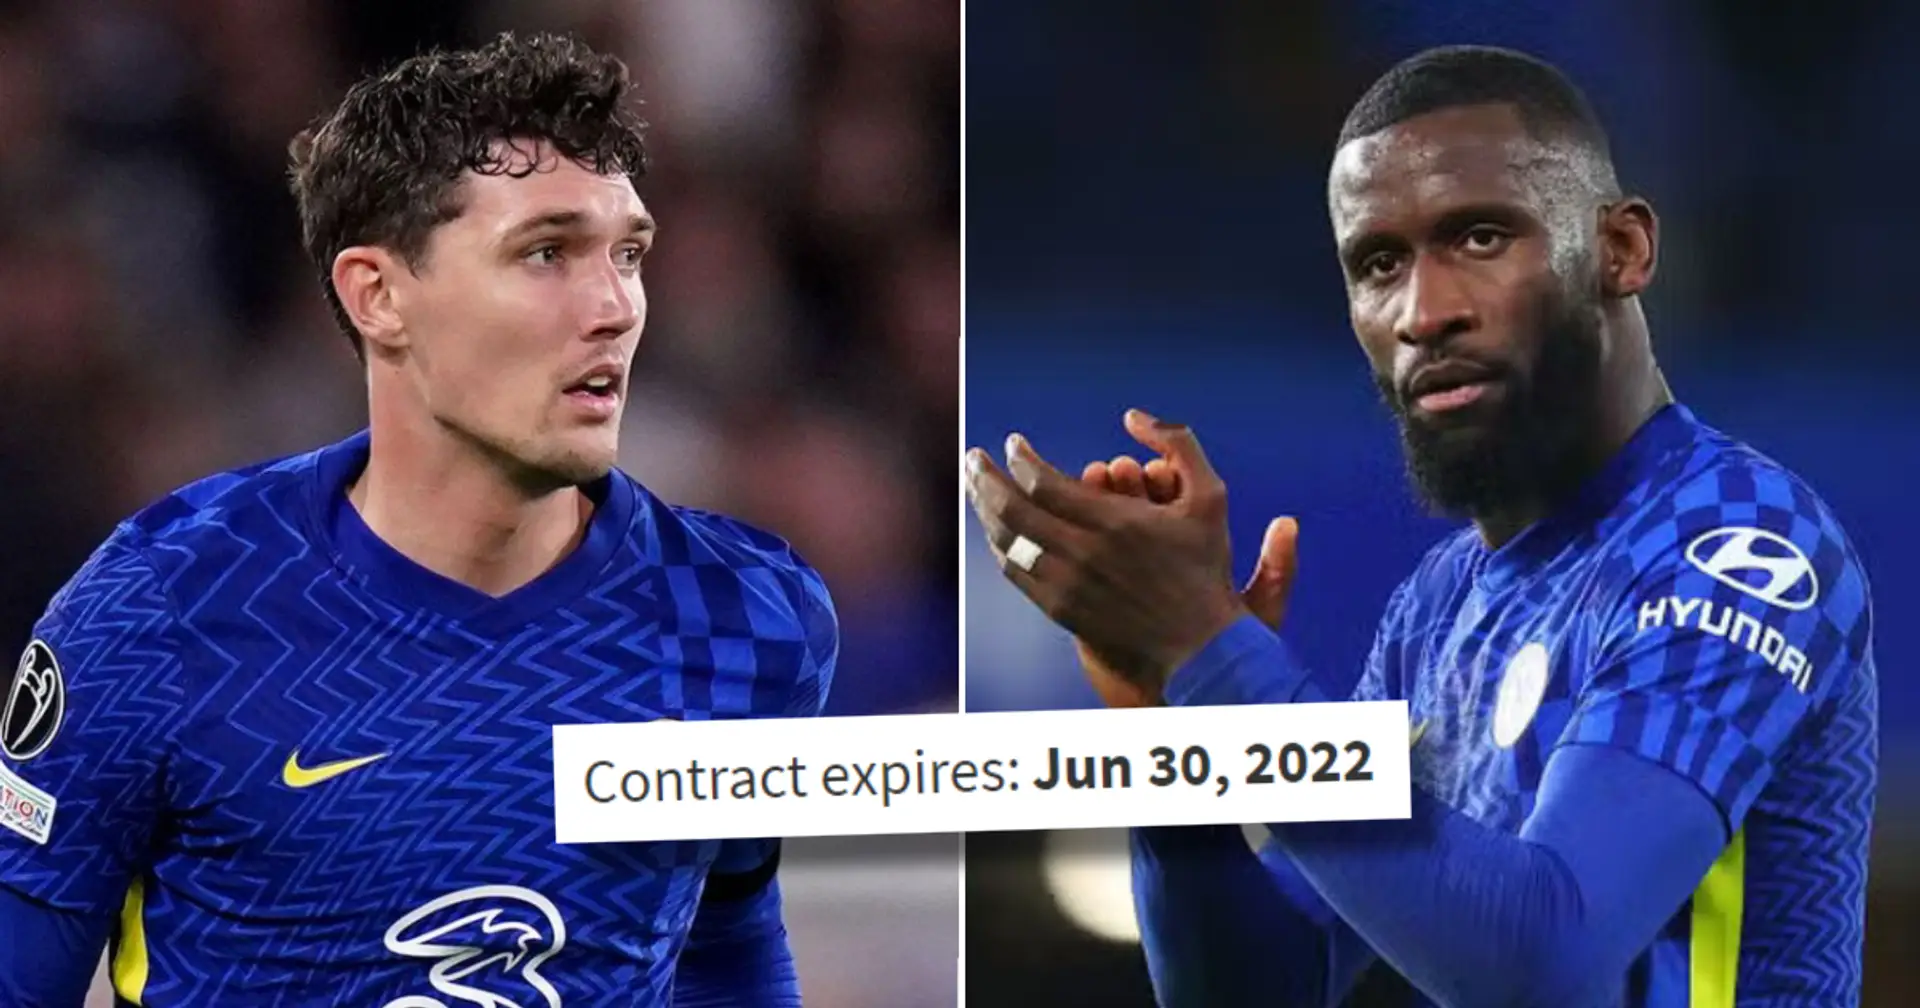 5 Chelsea players who are set to leave as free agents this summer: contract round-up